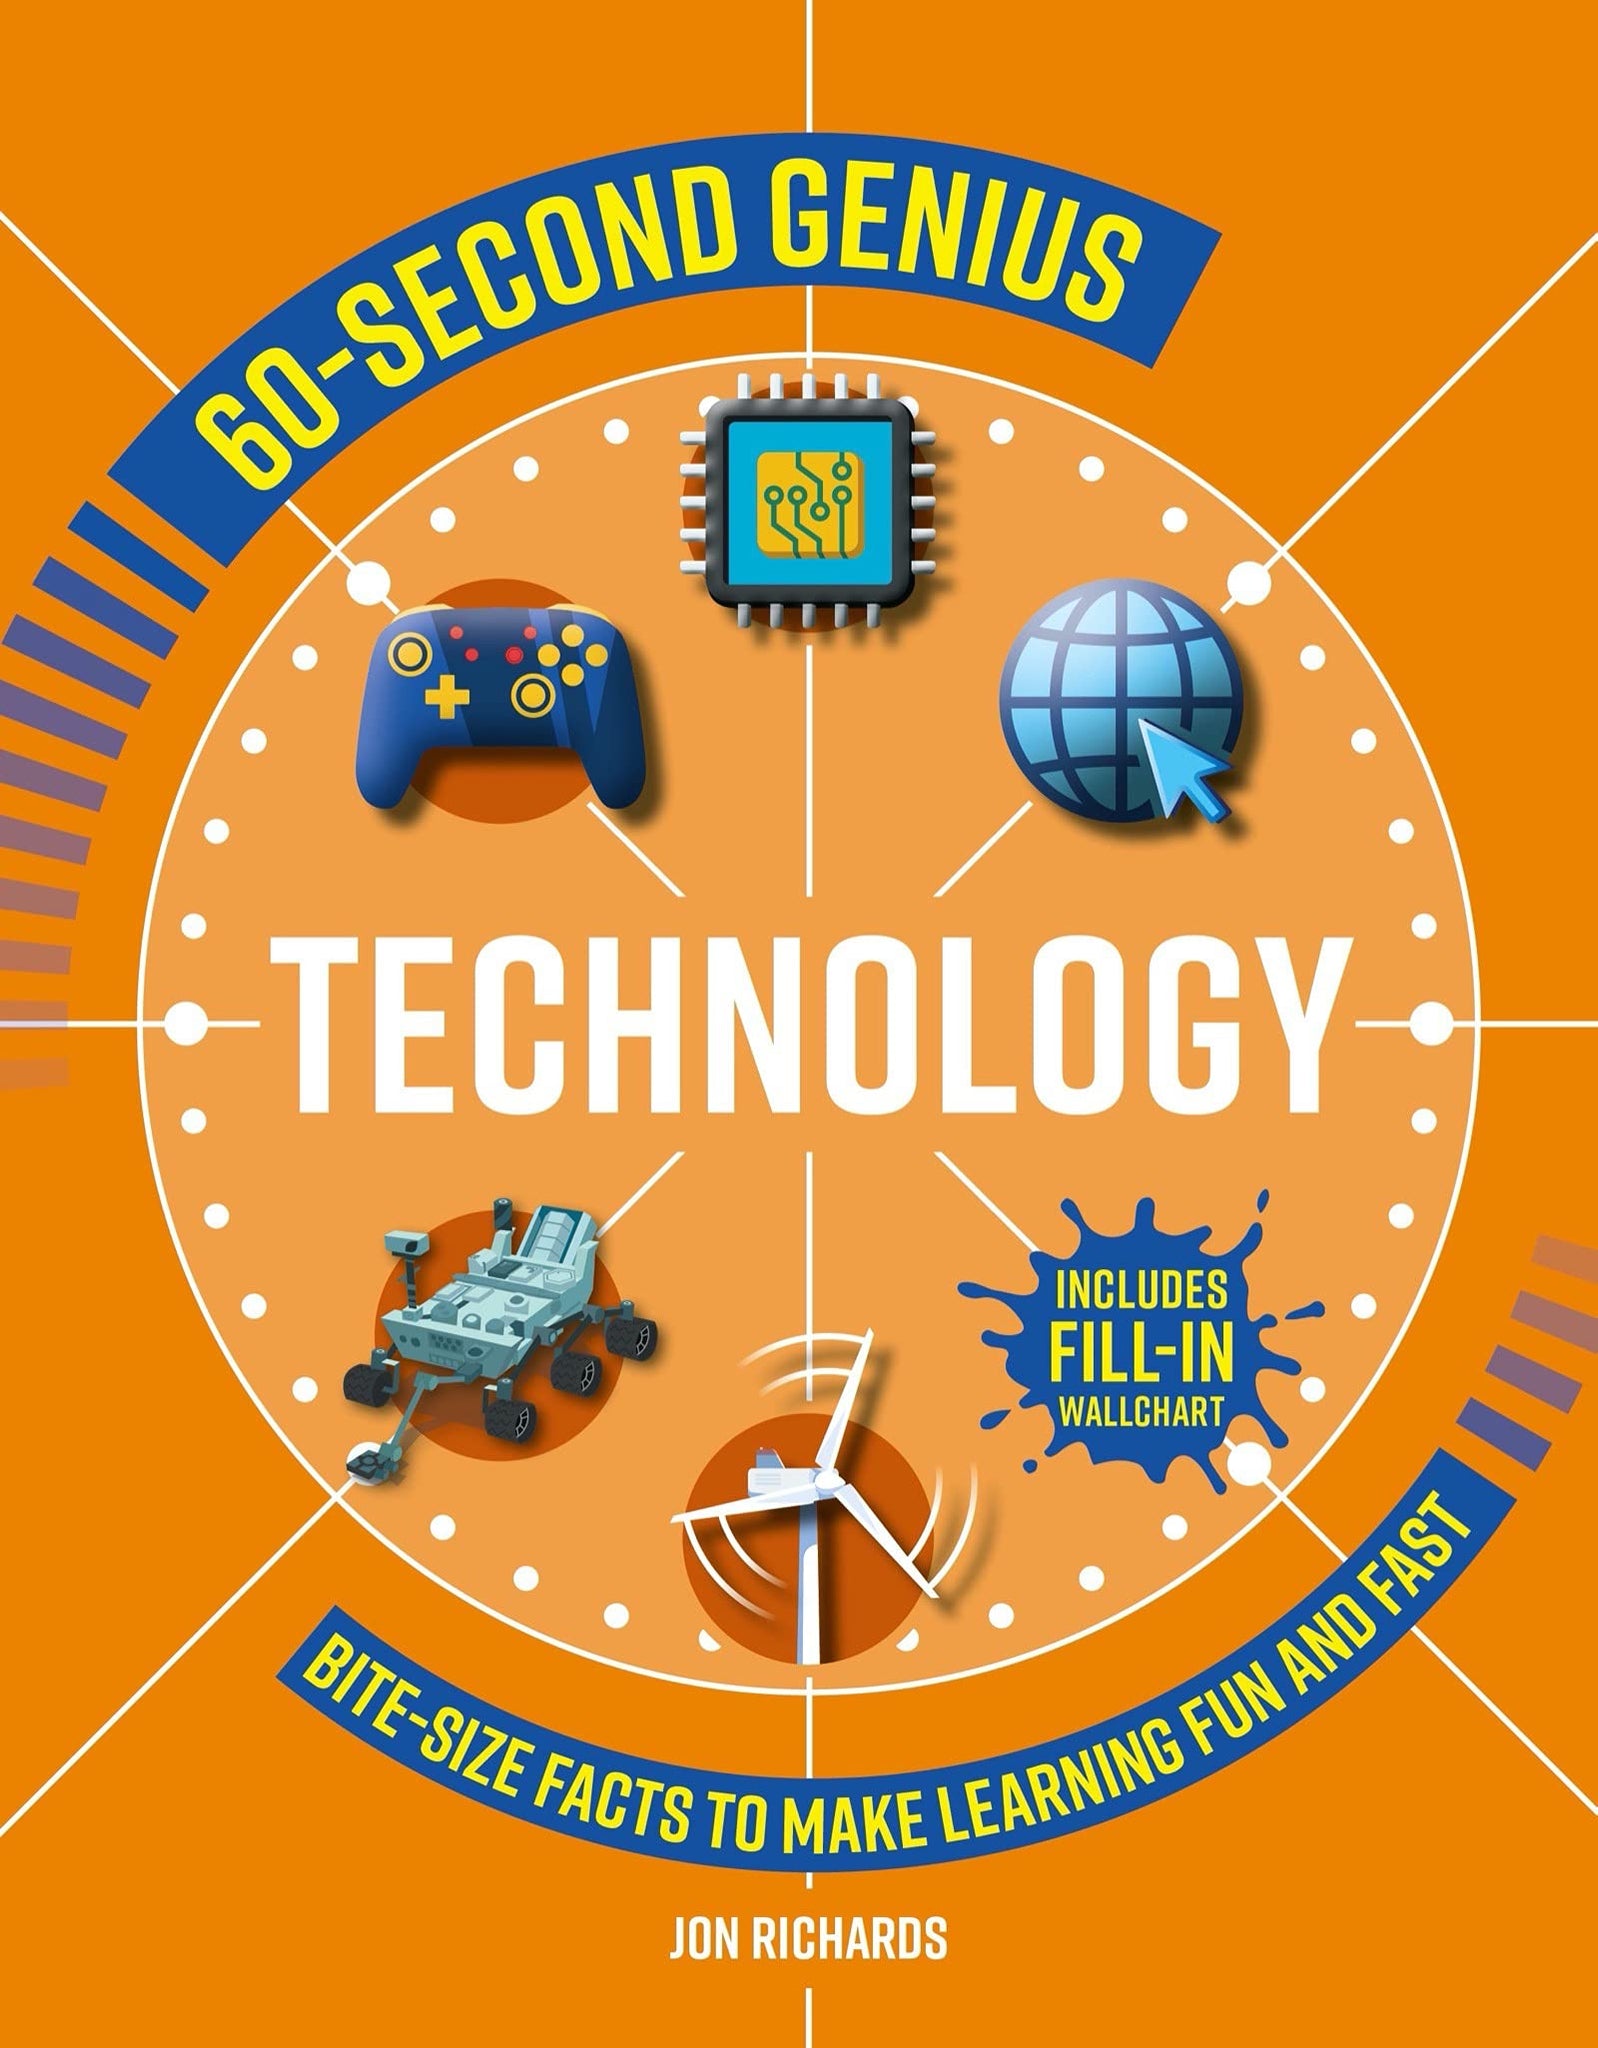 60-Second Genius - Technology: Bite-size facts to make learning fun and fast - Paperback